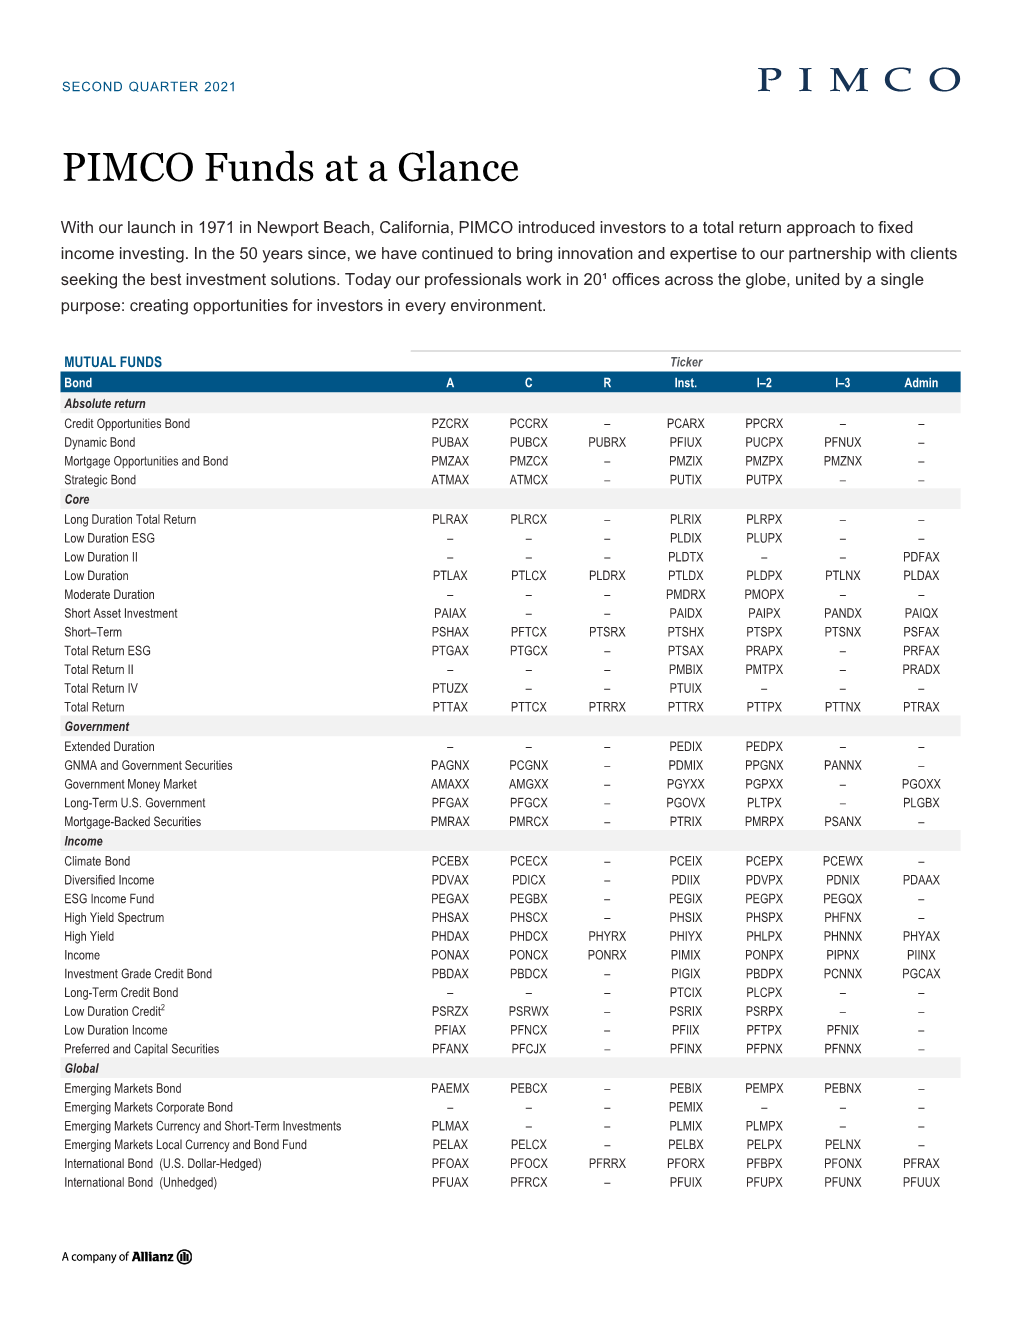 PIMCO Funds at a Glance